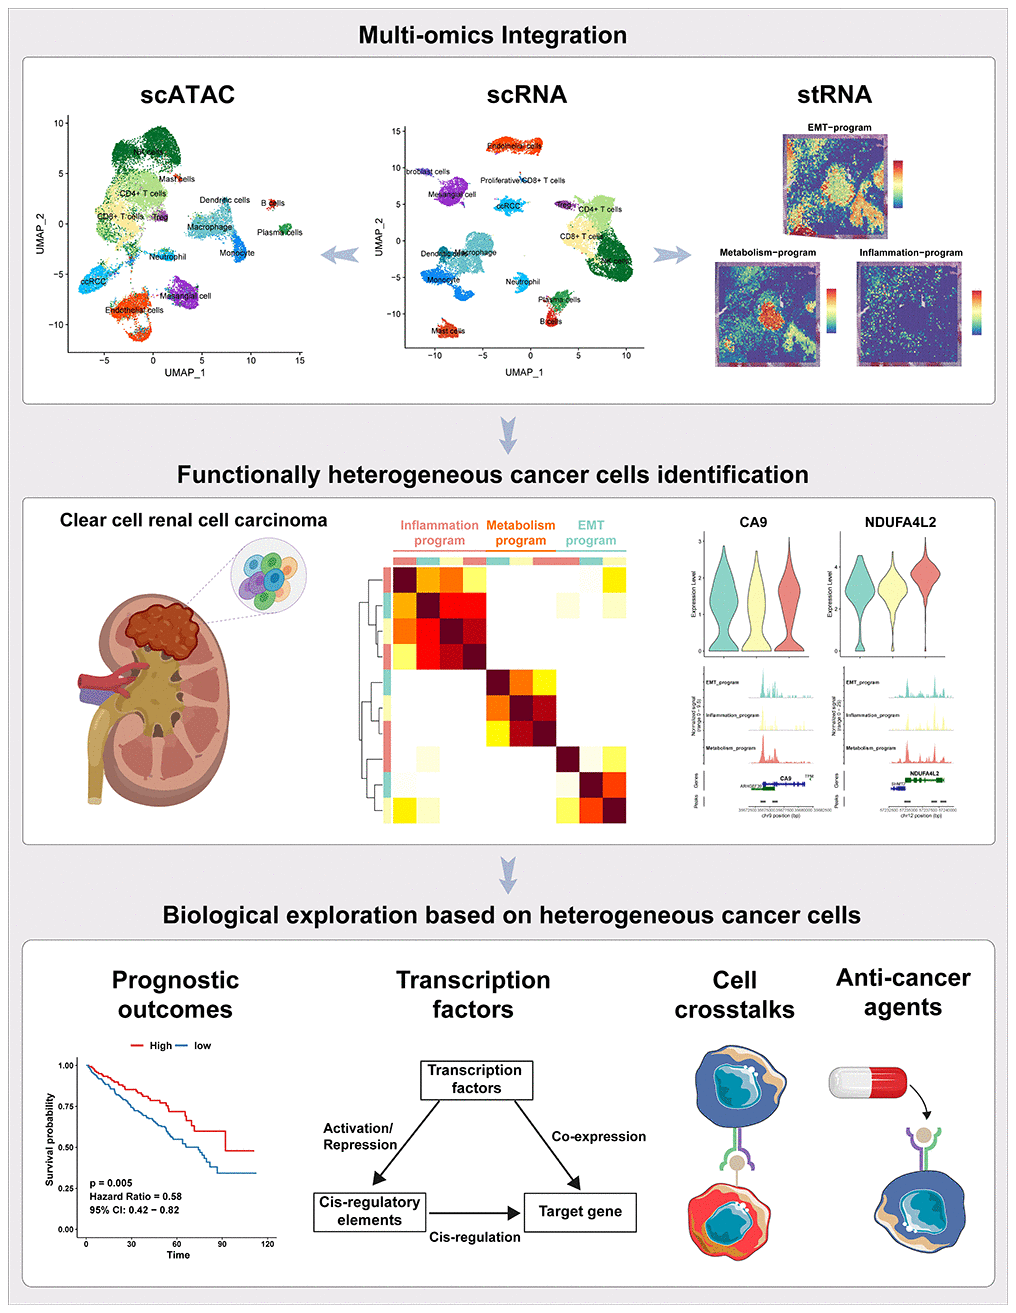 The workflow of the presented study. In this study, we approached the functional heterogeneity of cancer cells from a single-cell multi-omics perspective, classifying them into metabolism, inflammatory, and EMT meta programs. Spatial transcriptome sequencing provided spatial information about these distinct meta programs within cancer cells. Bulk-RNA data revealed the high clinical prognostic value of the functional heterogeneity of cancer cells. Transcription factor regulatory networks and motif activities unveiled key transcription factors regulating the functional heterogeneity of ccRCC cancer cells. Interactions between different meta programs cancer cells and other cellular subpopulations in the tumor microenvironment were demonstrated using cellphoneDB. Finally, we assessed the sensitivity of cancer cells from different meta programs to various anticancer drugs.